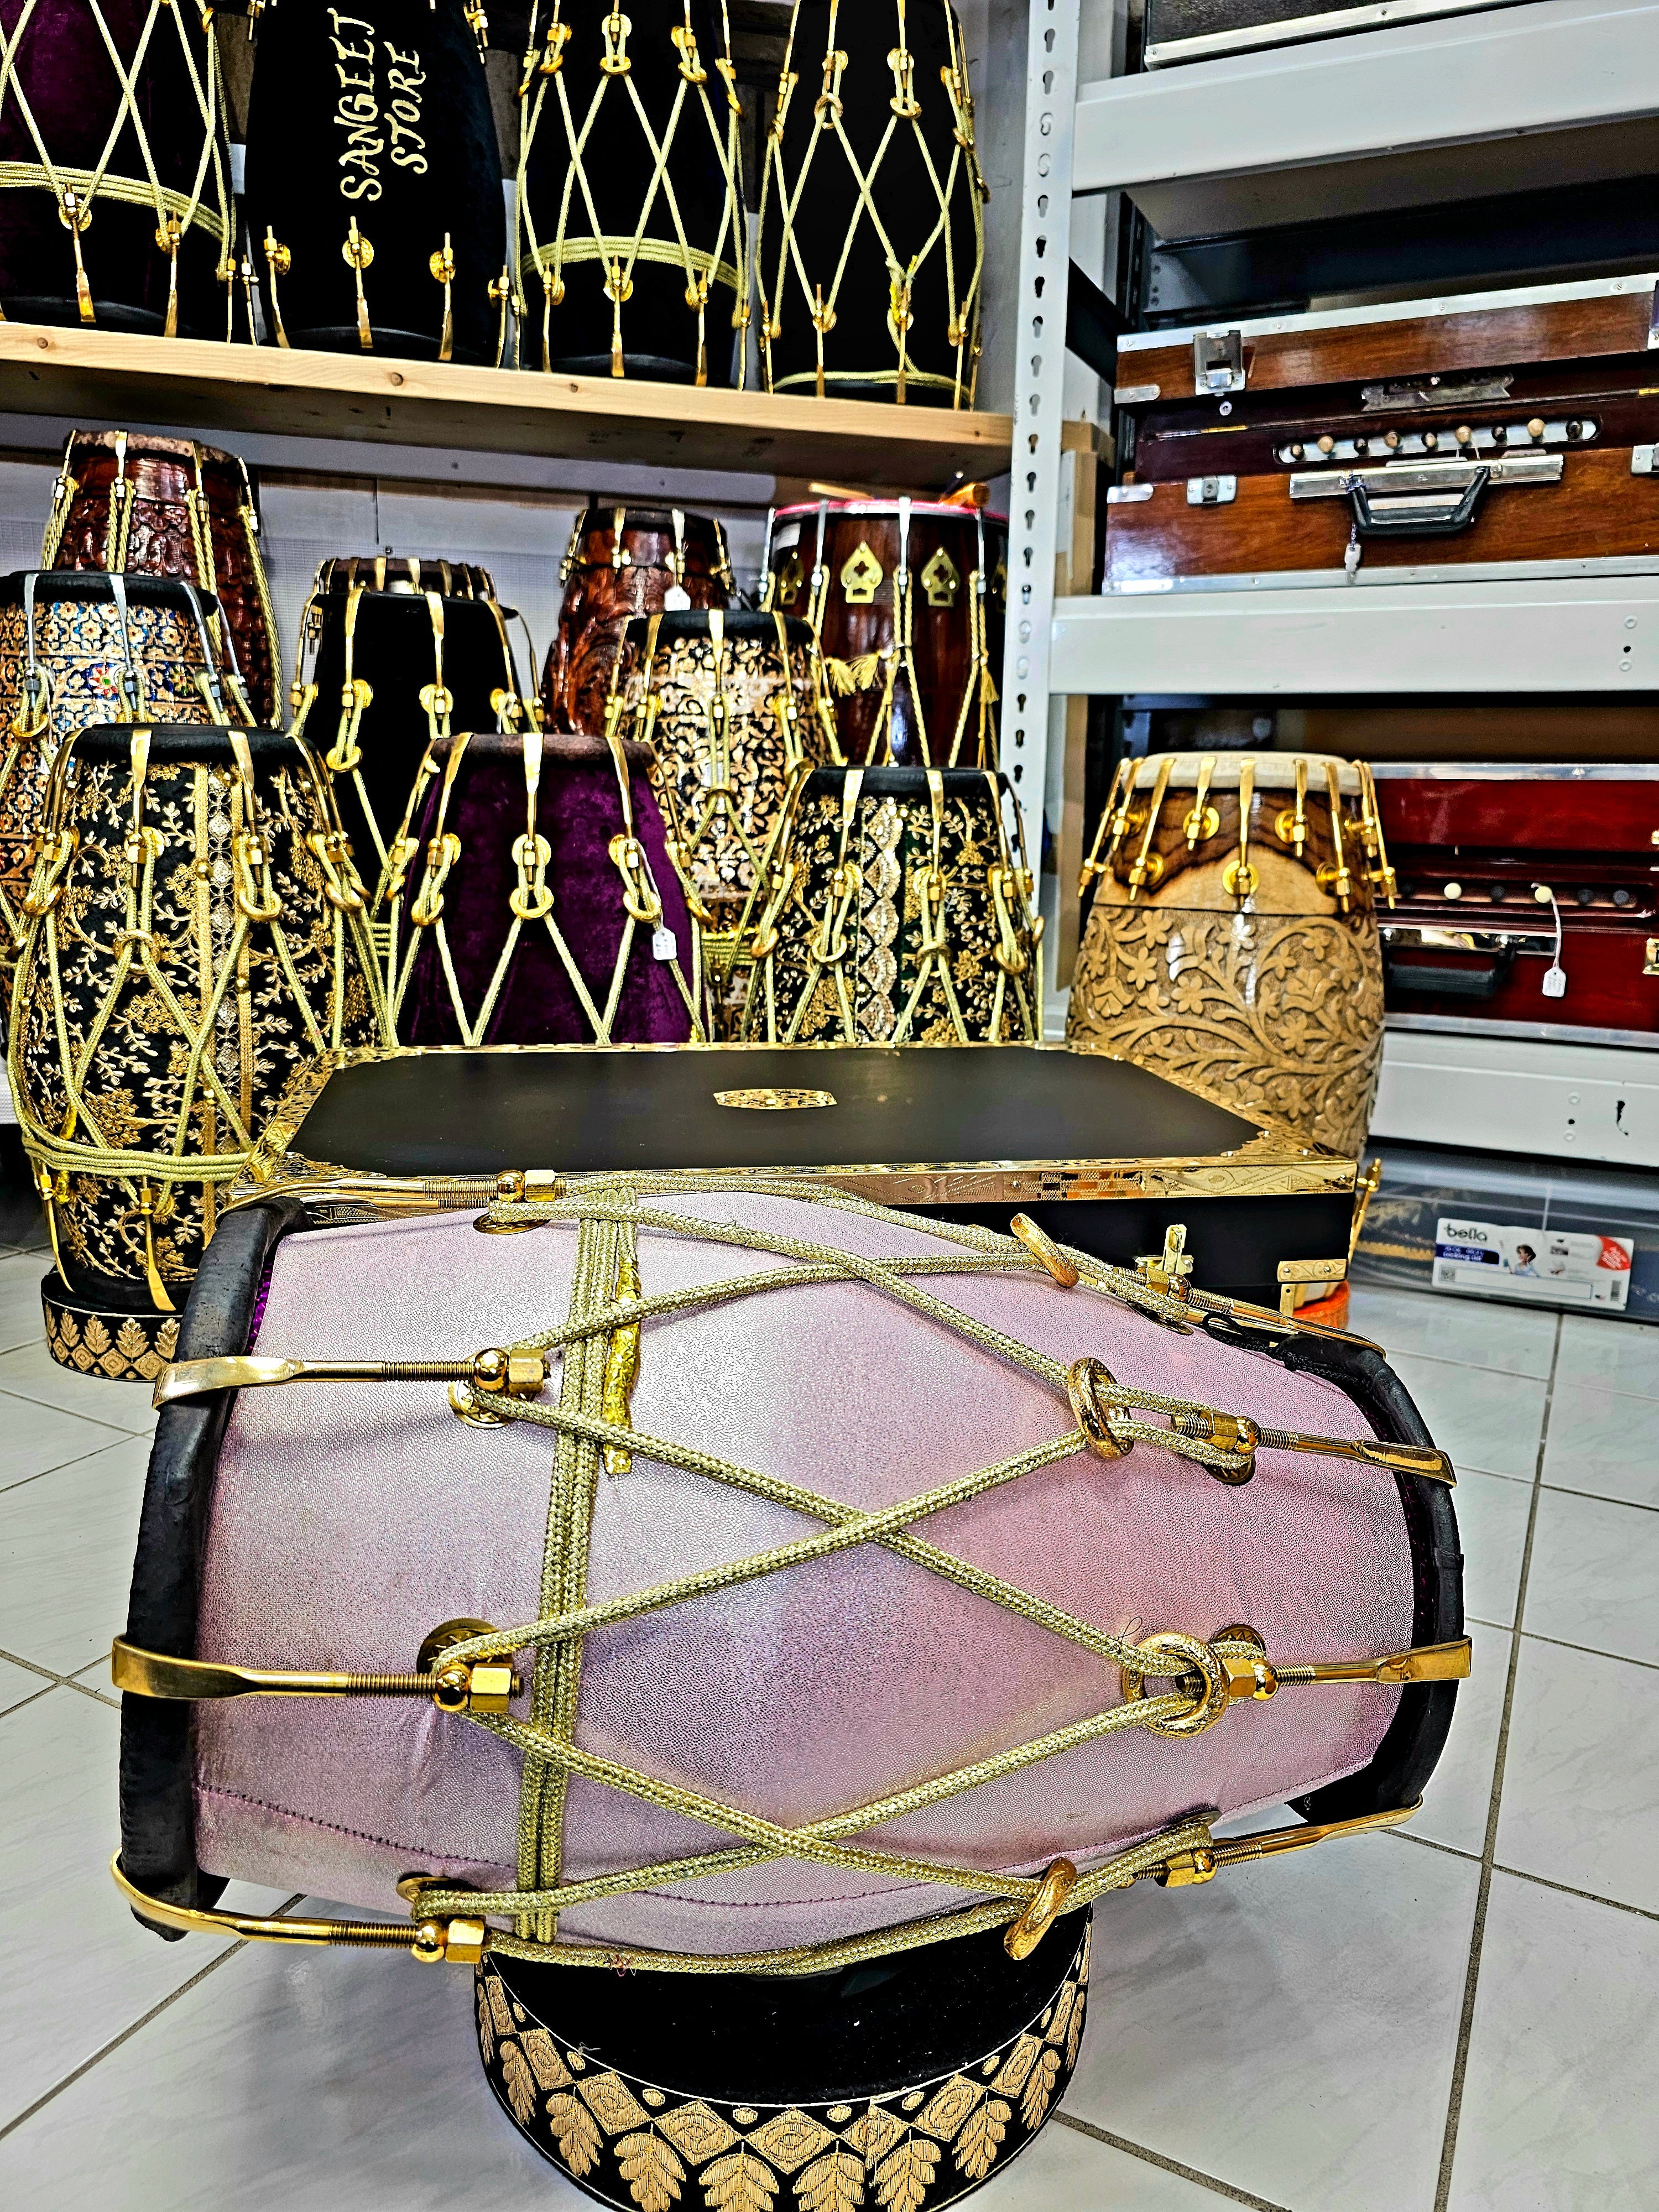 Enchanting Blush Sparkle: Red Sheesham Dholak in Sparkly Pink Wrap, Black Skins, Golden Brass Accents, and Intricate Golden Ropes